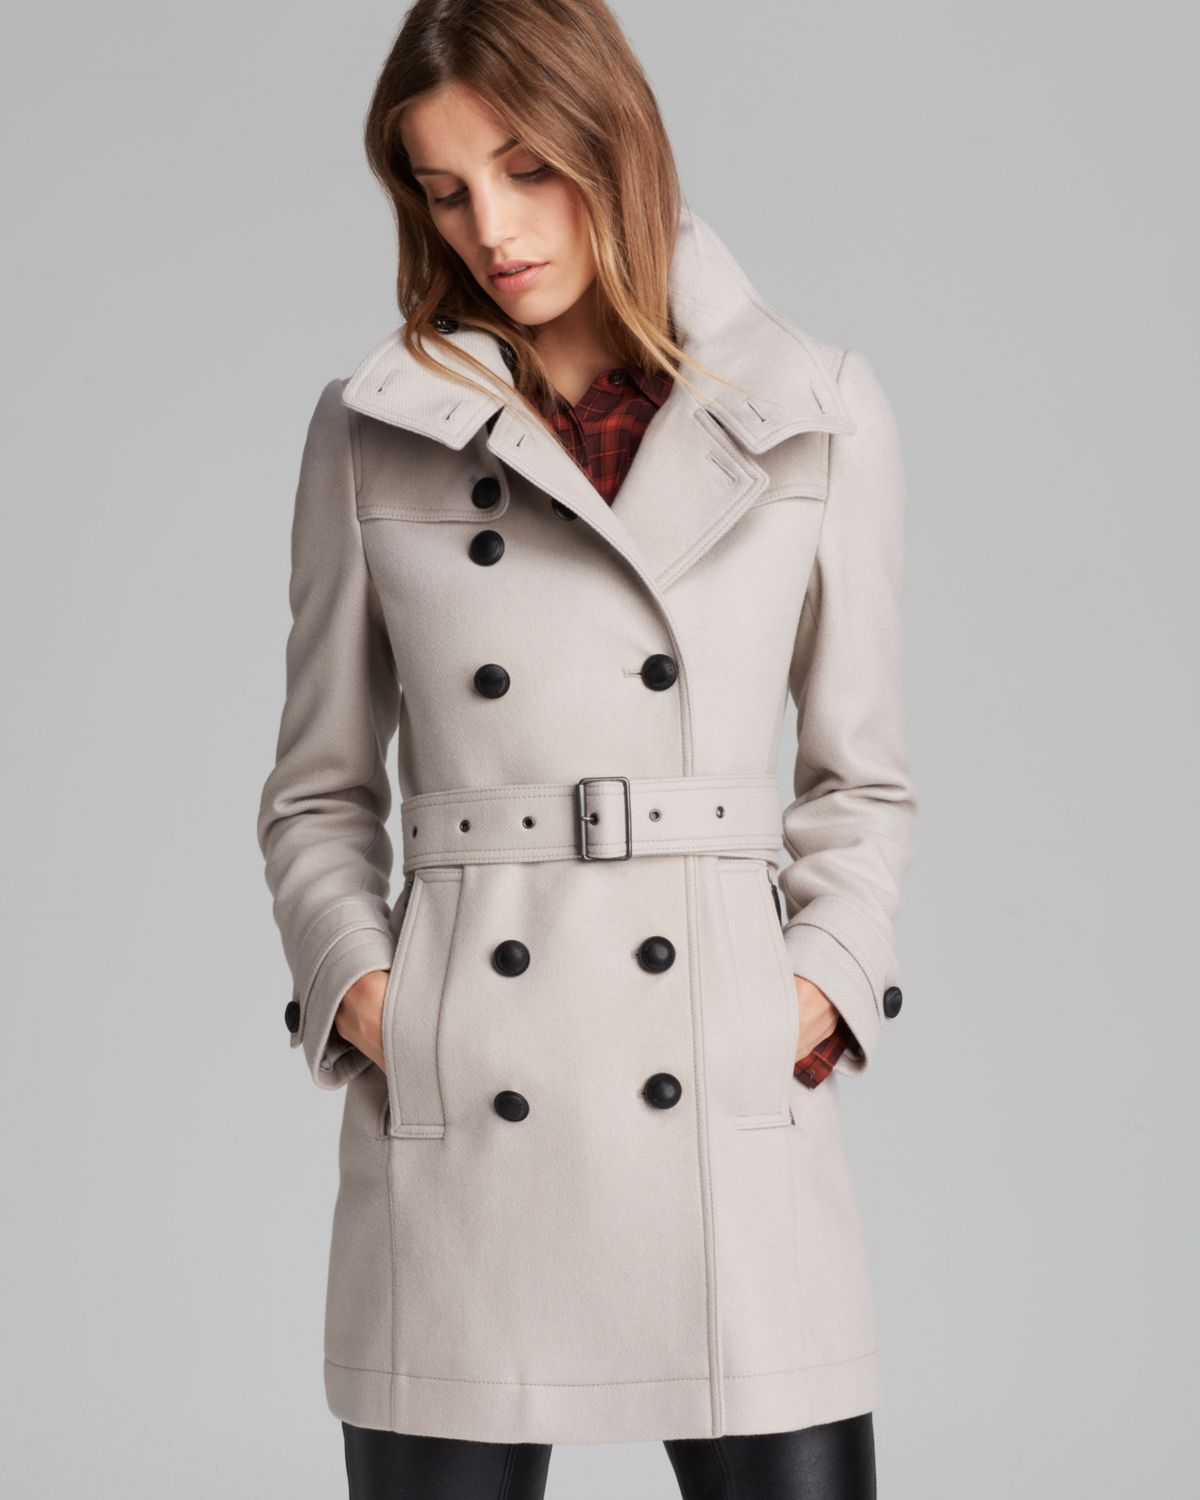 Lyst - Burberry Brit Daylesmoore Coat in Natural